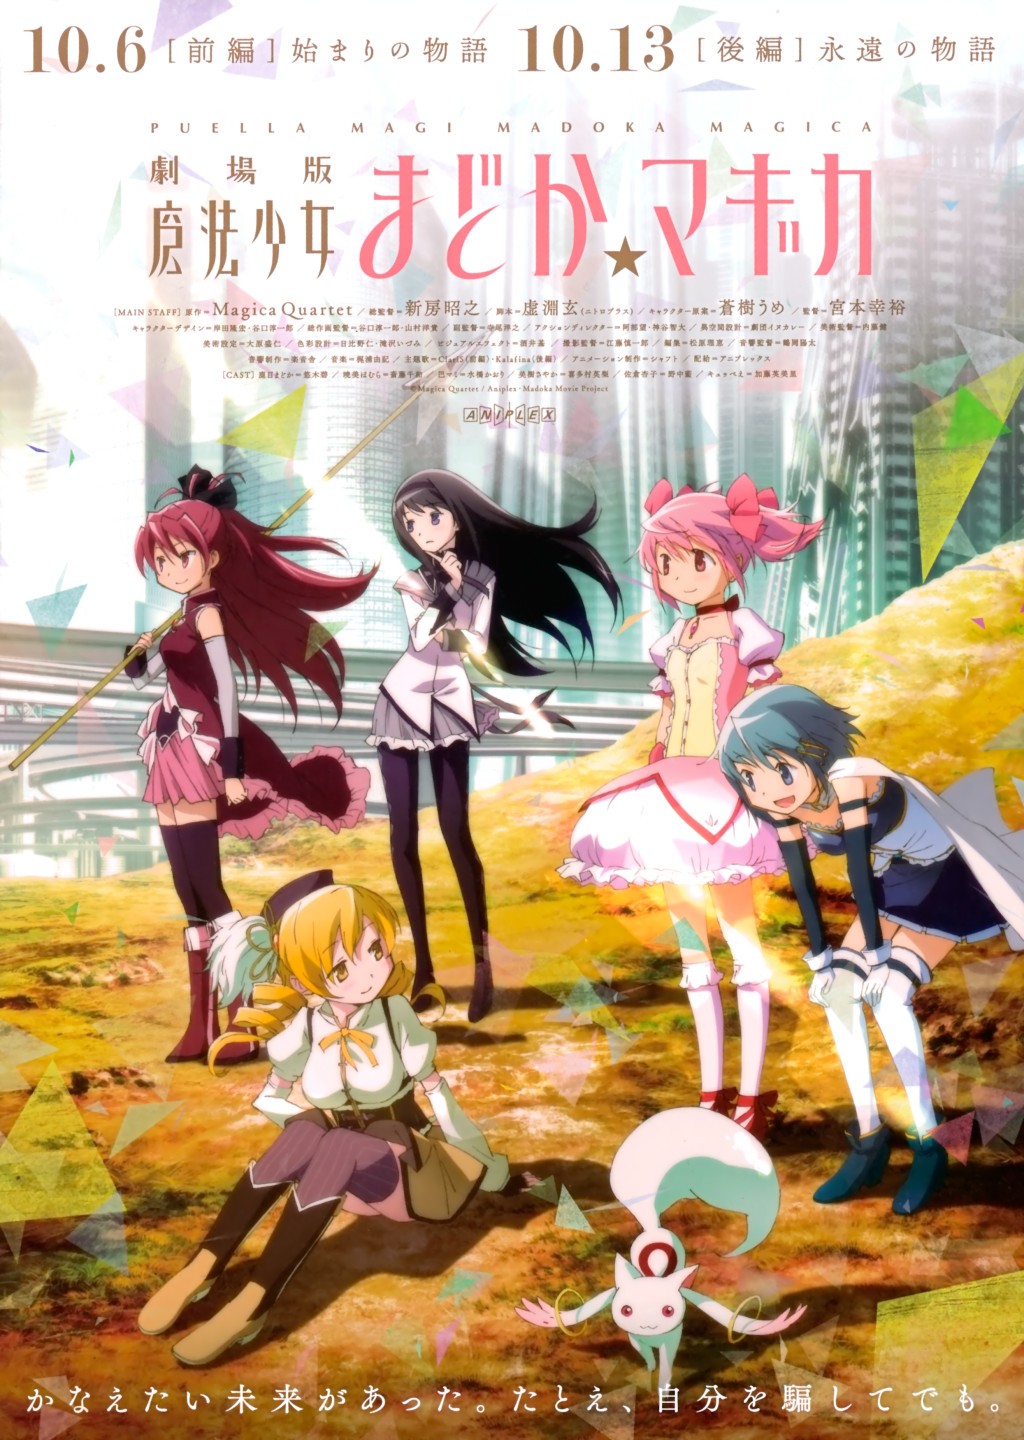 Extra Large Movie Poster Image for Puella Magi Madoka Magica the Movie Part I: The Beginning Story (#1 of 3)